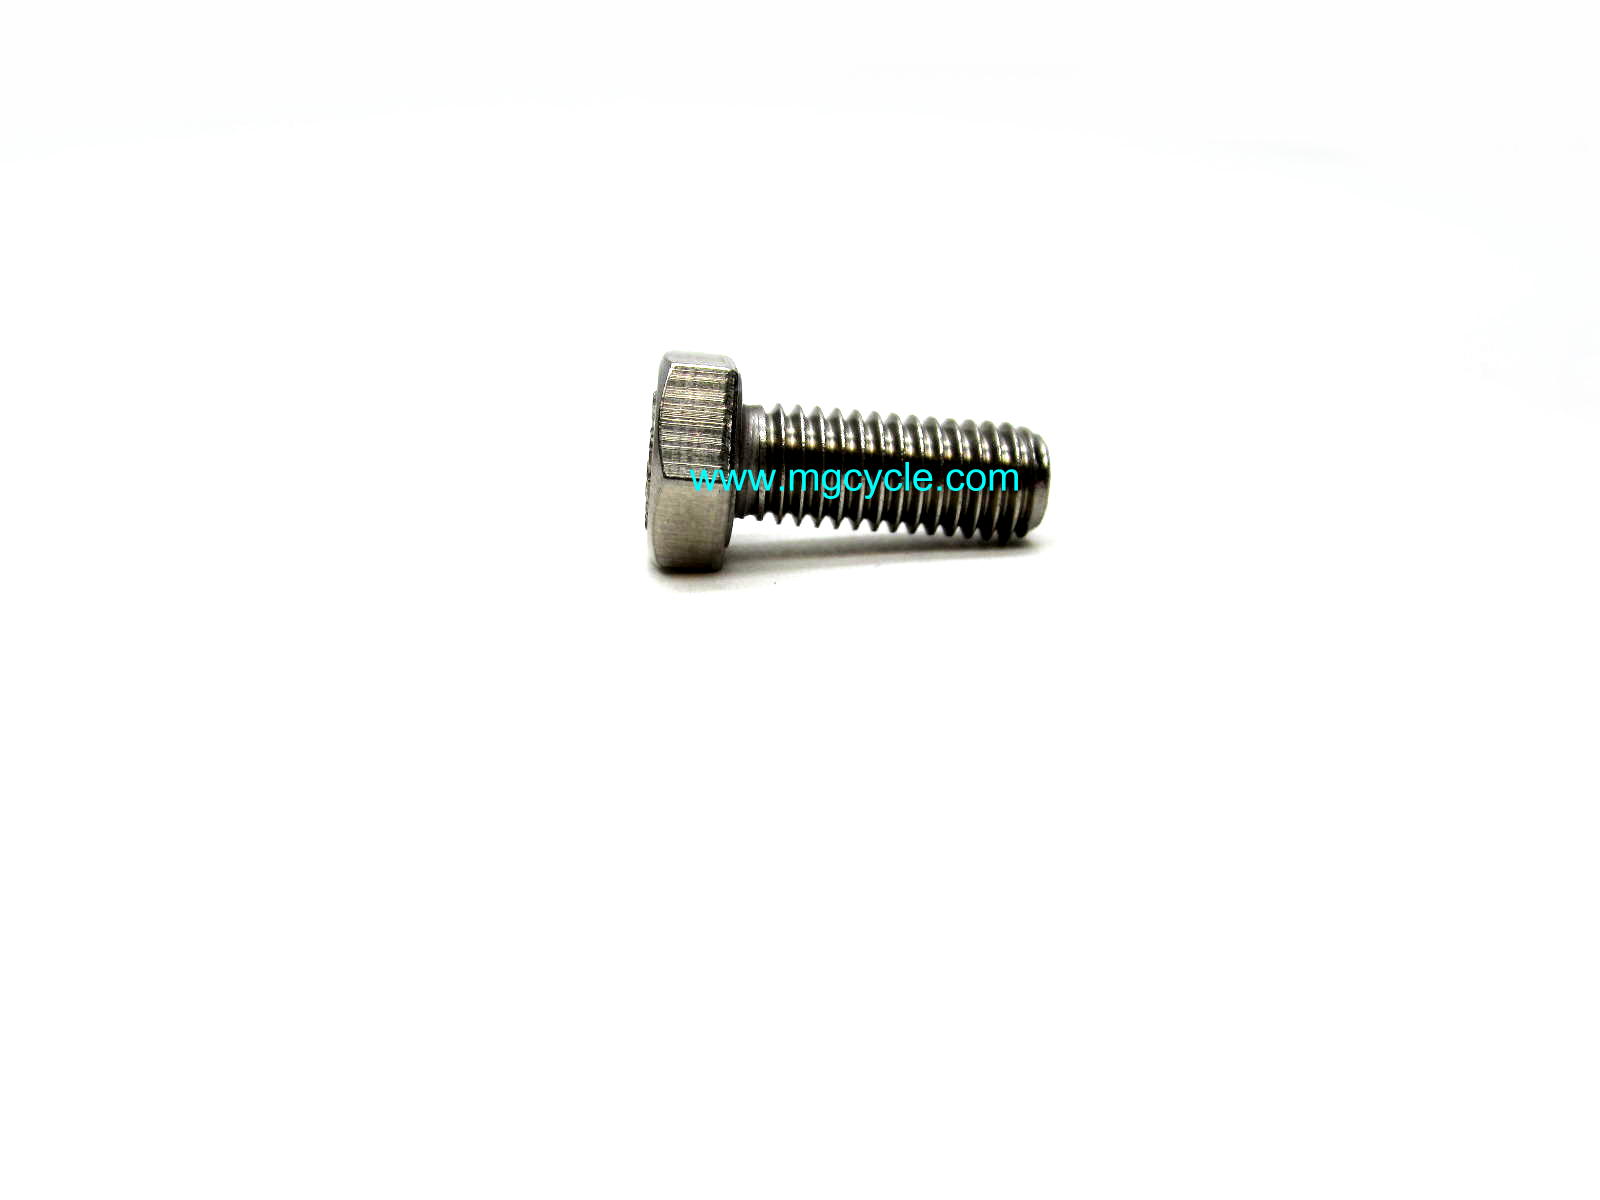 8mm x 20mm hex head bolt, stainless steel